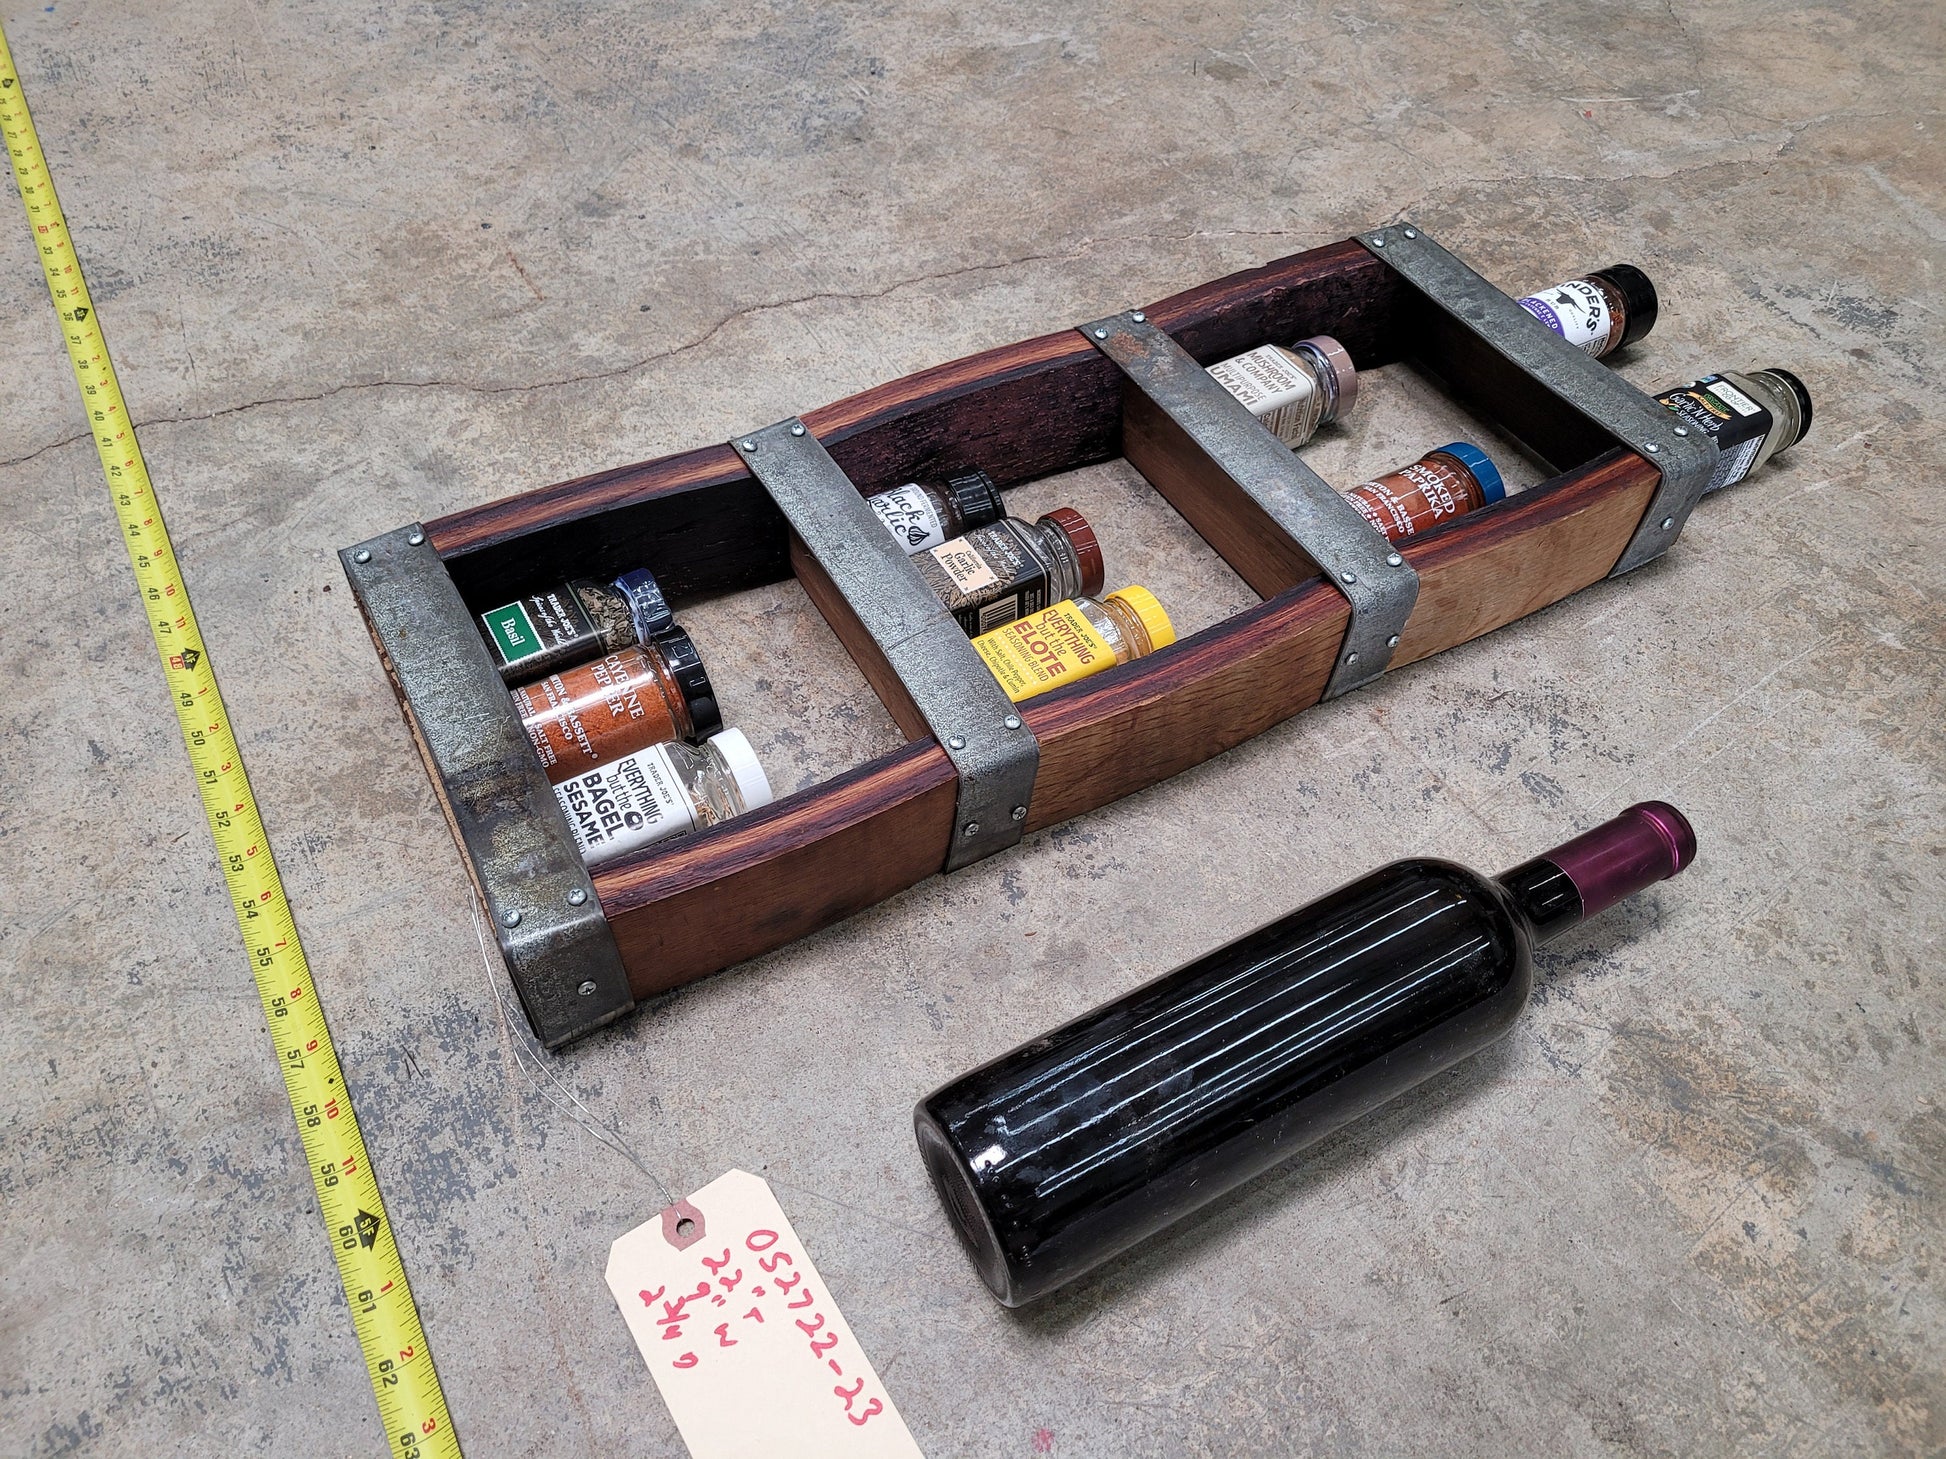 SALE Prototype Wine Barrel Spice Rack Made from retired California wine barrels. 100% Recycled + Ready to Ship! 052722-23